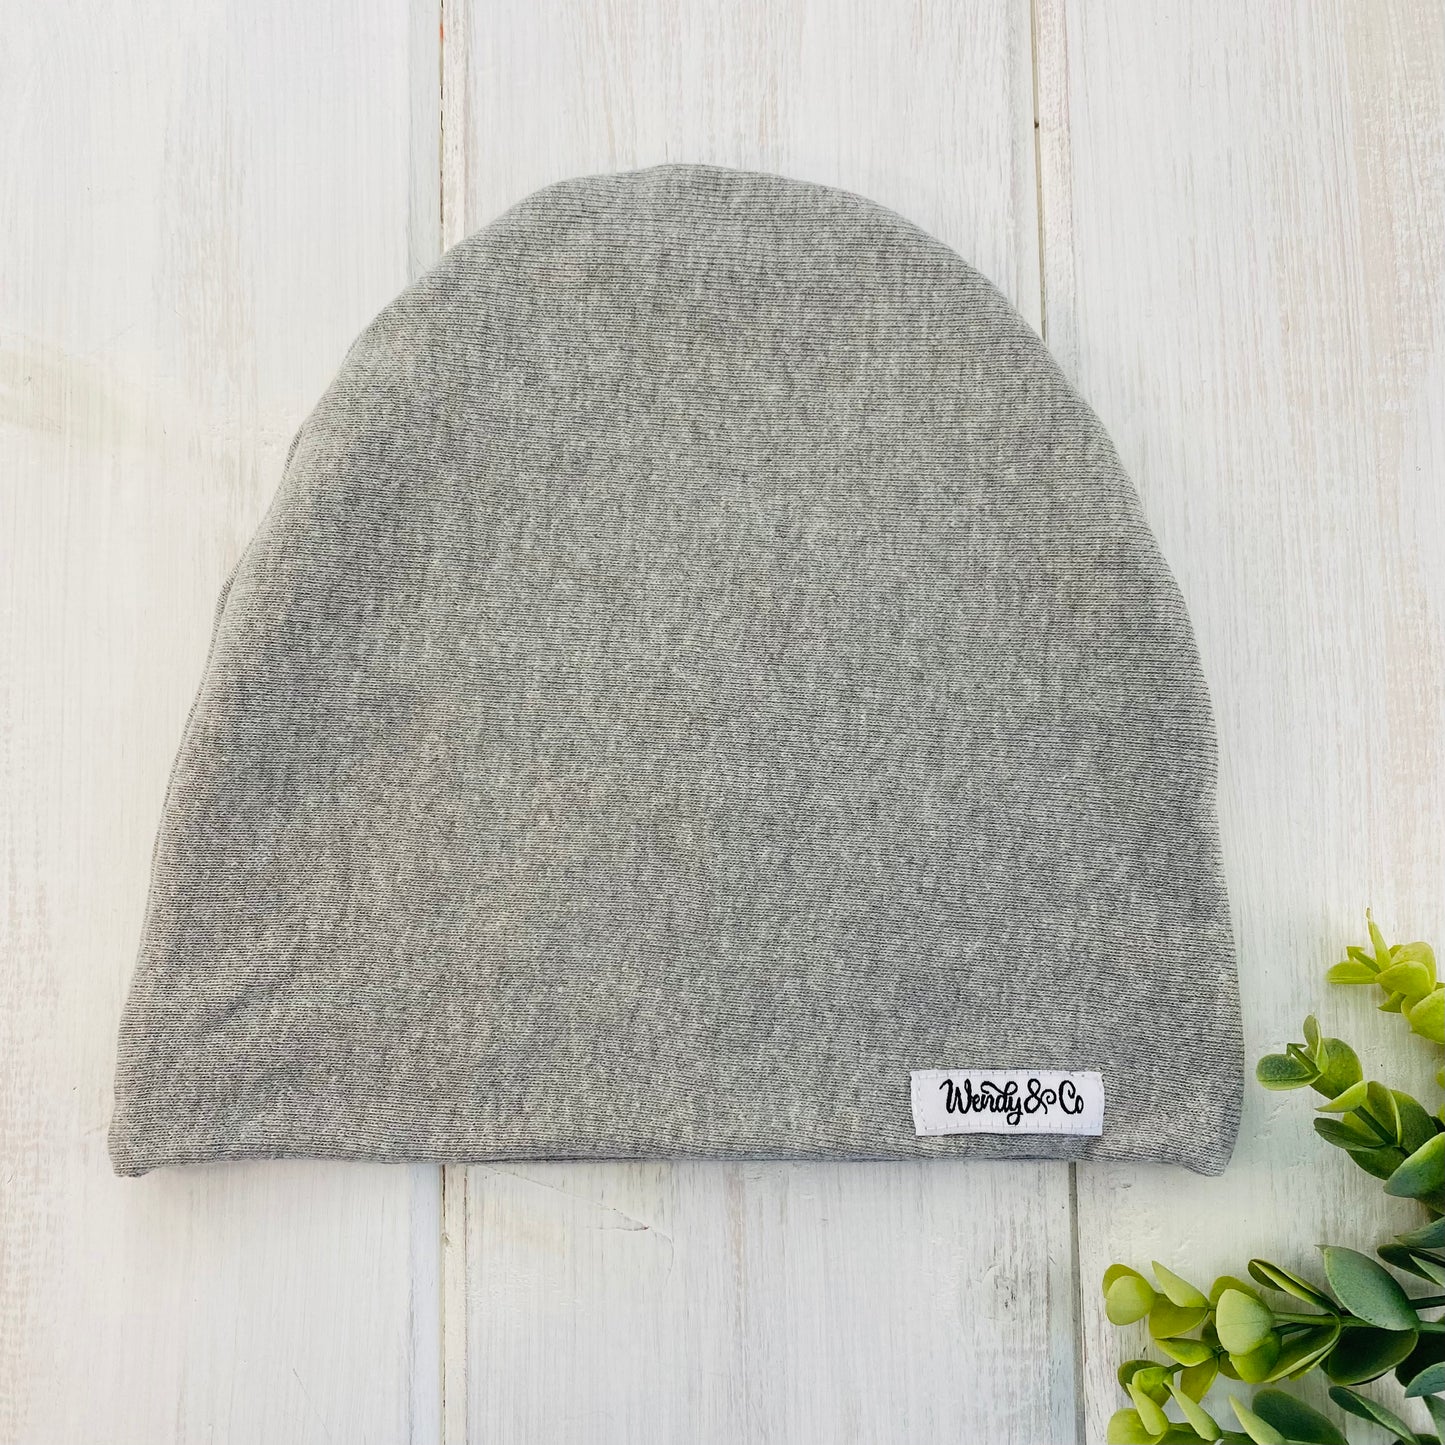 Super soft gray beanie in modern slouchy fit.